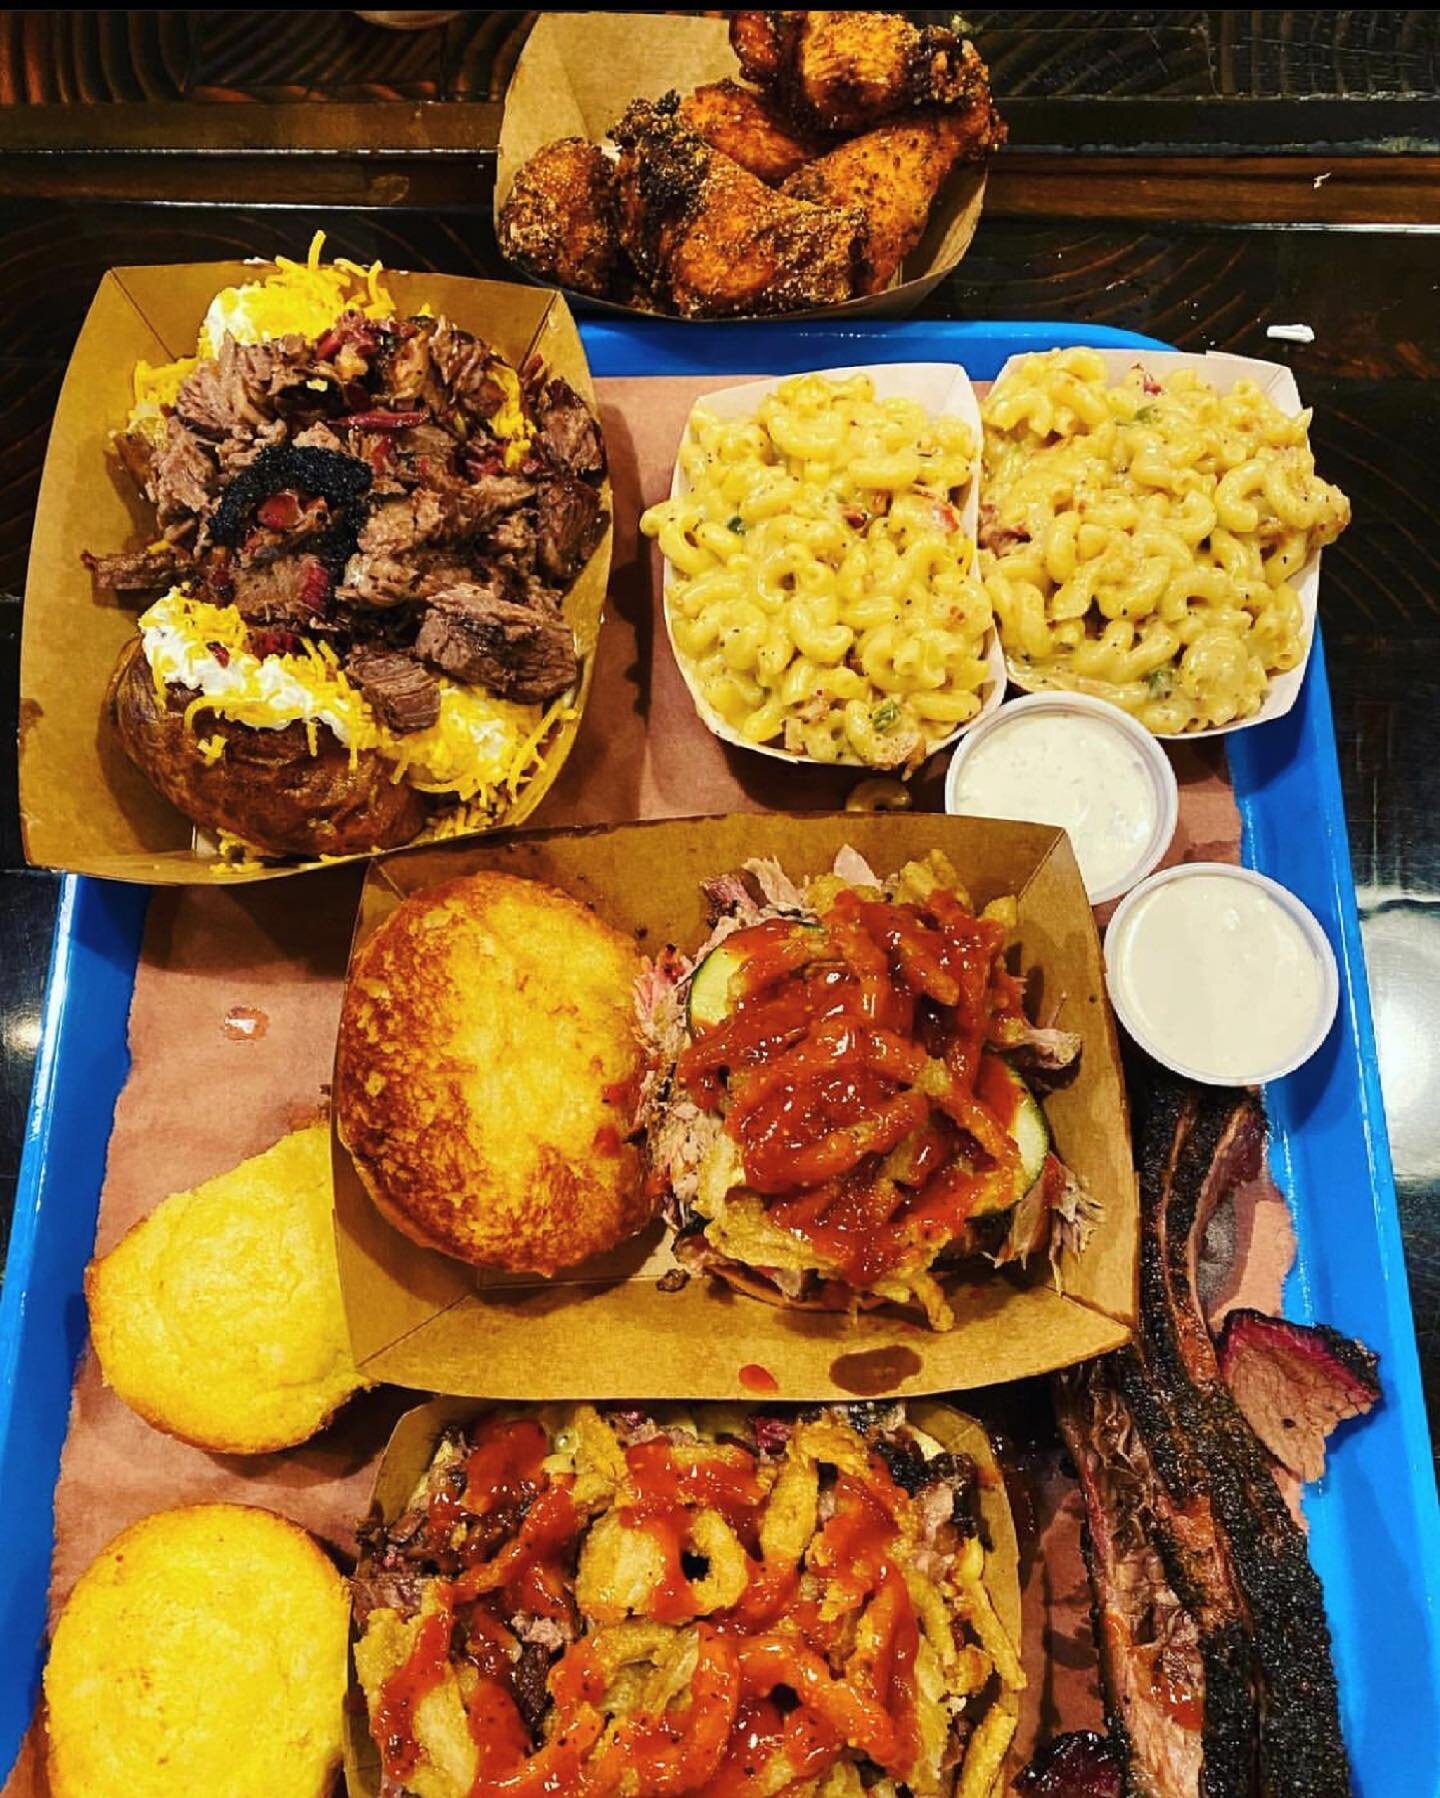 We are closed today to allow our staff to rest up from the 4th of July weekend of stackin fat trays of delicious BBQ like this one that @kulinarykyle ordered! 💪 #happy4thofjuly &thinsp;
&thinsp;
&thinsp;
#independenceday #freedom #bbq #brisket &thin